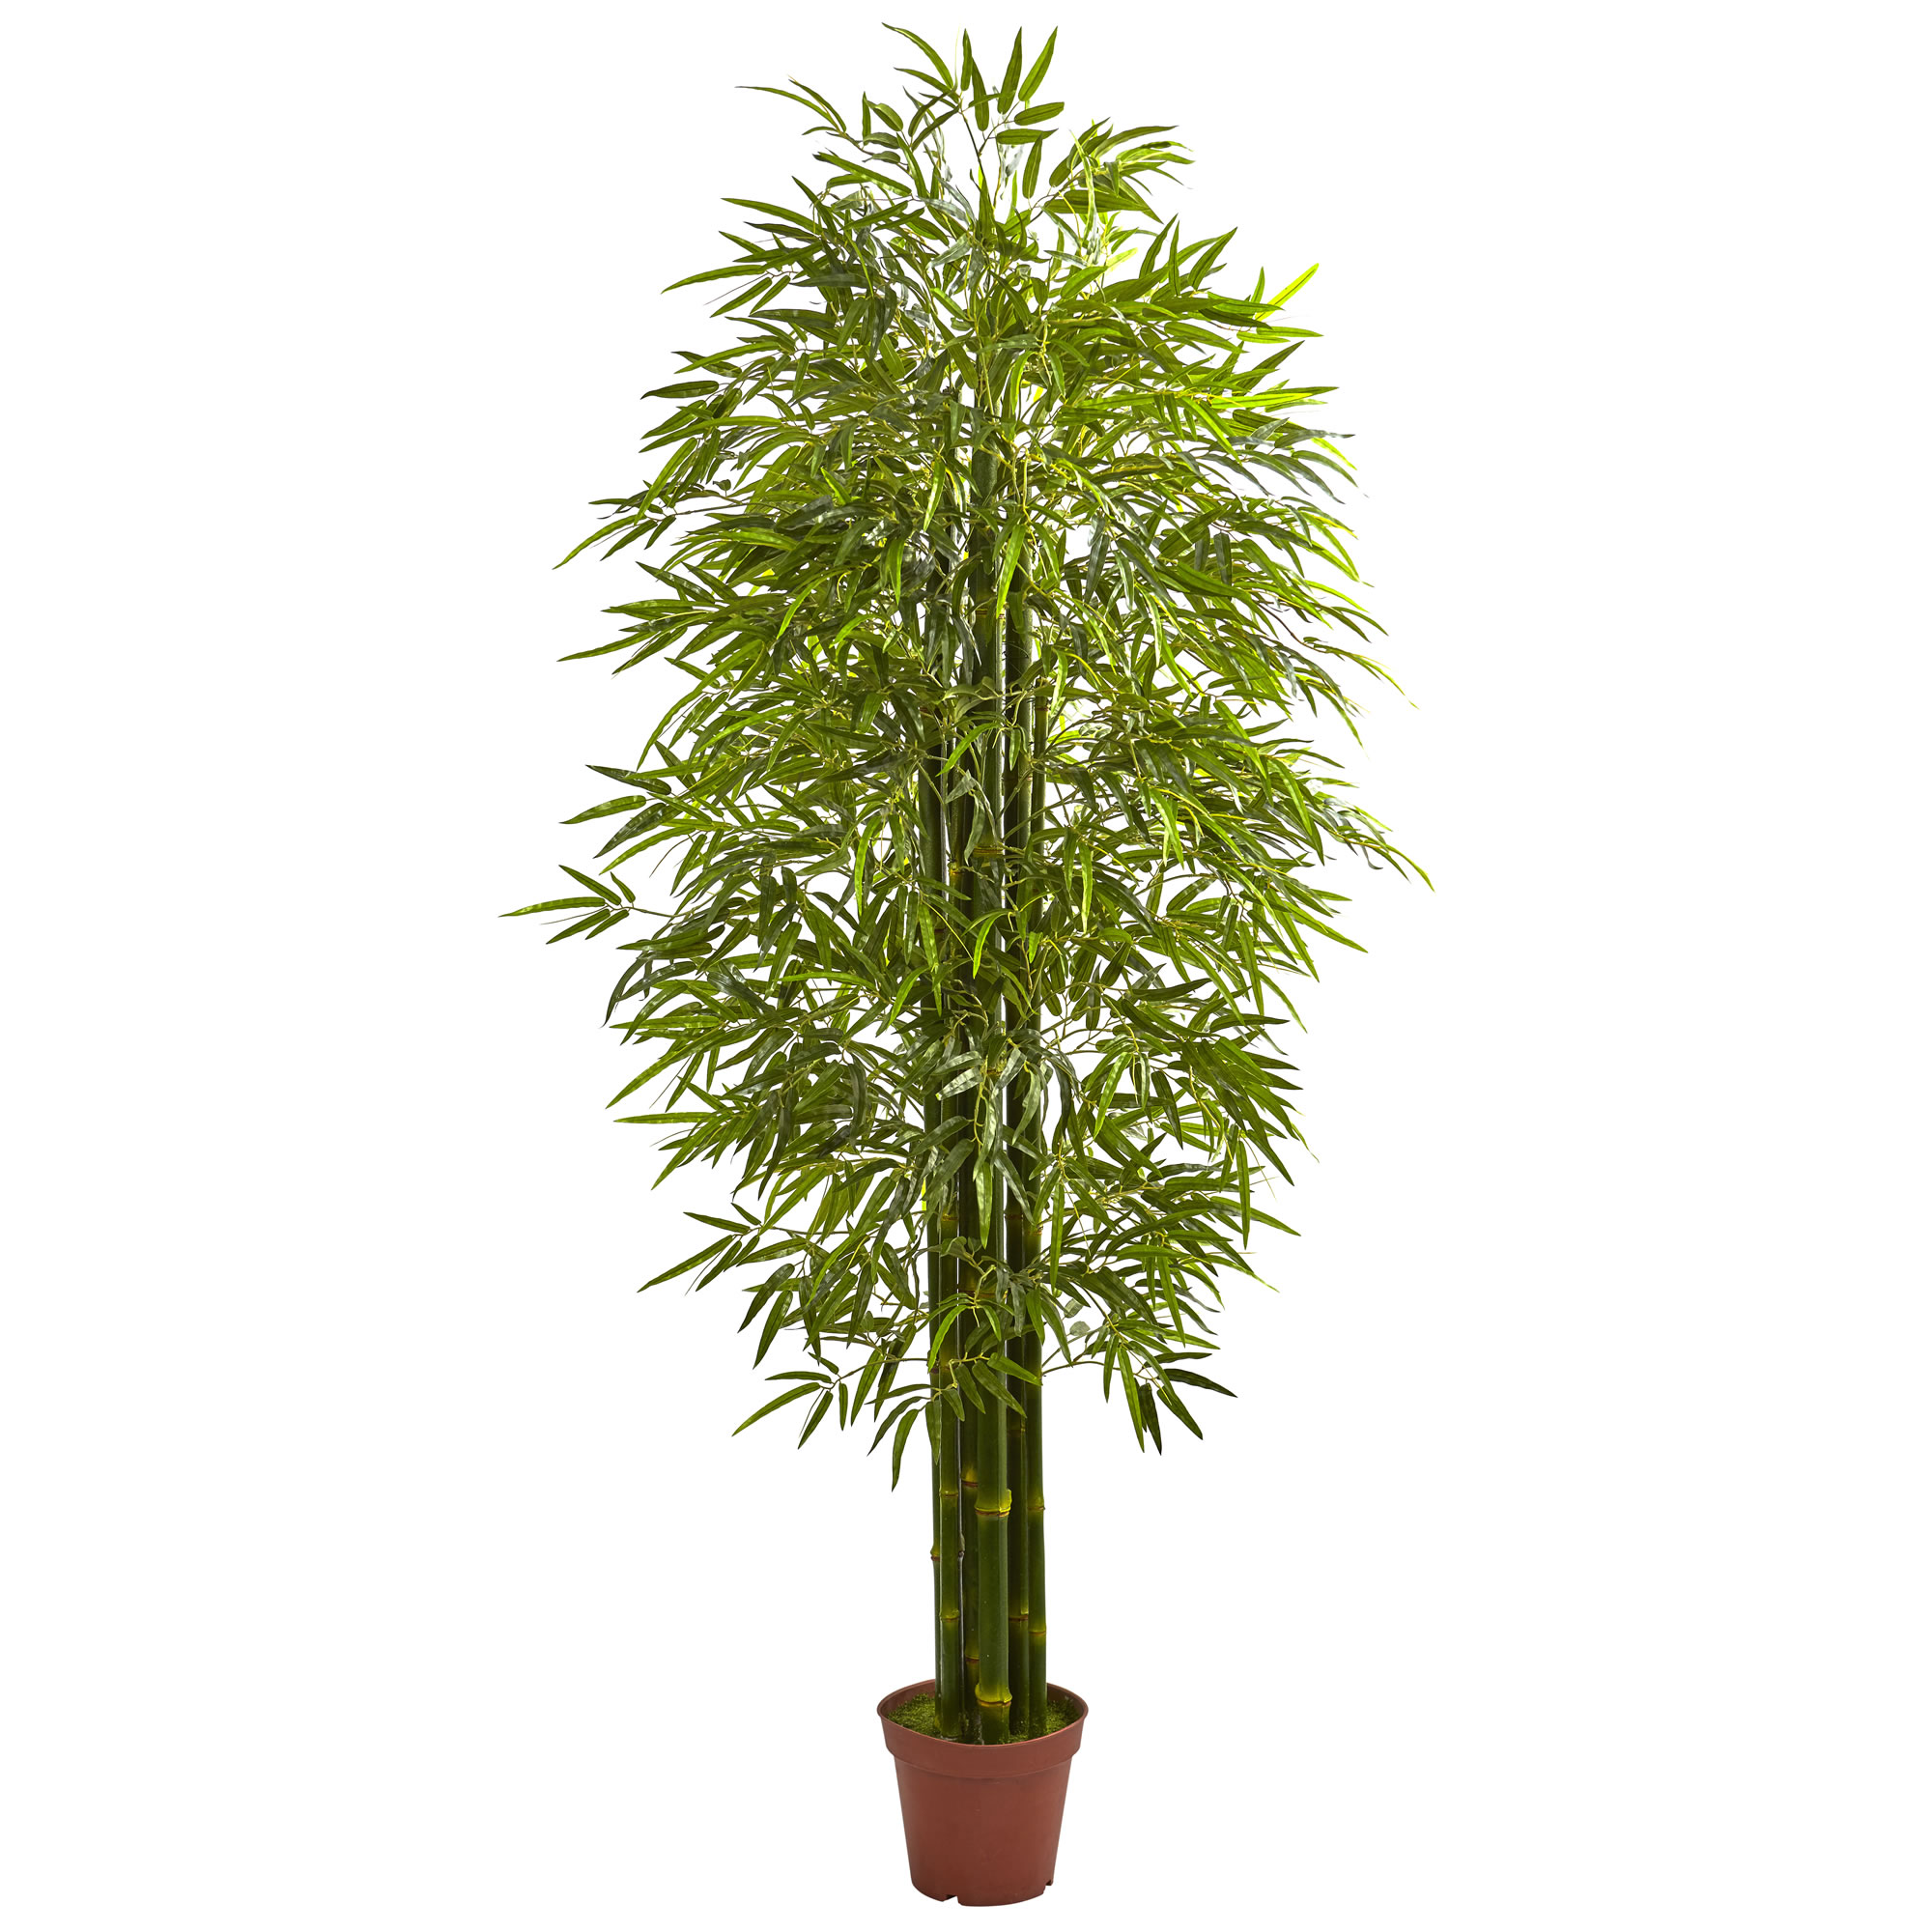 7 Foot Outdoor Bamboo Tree: Limited Uv Protection